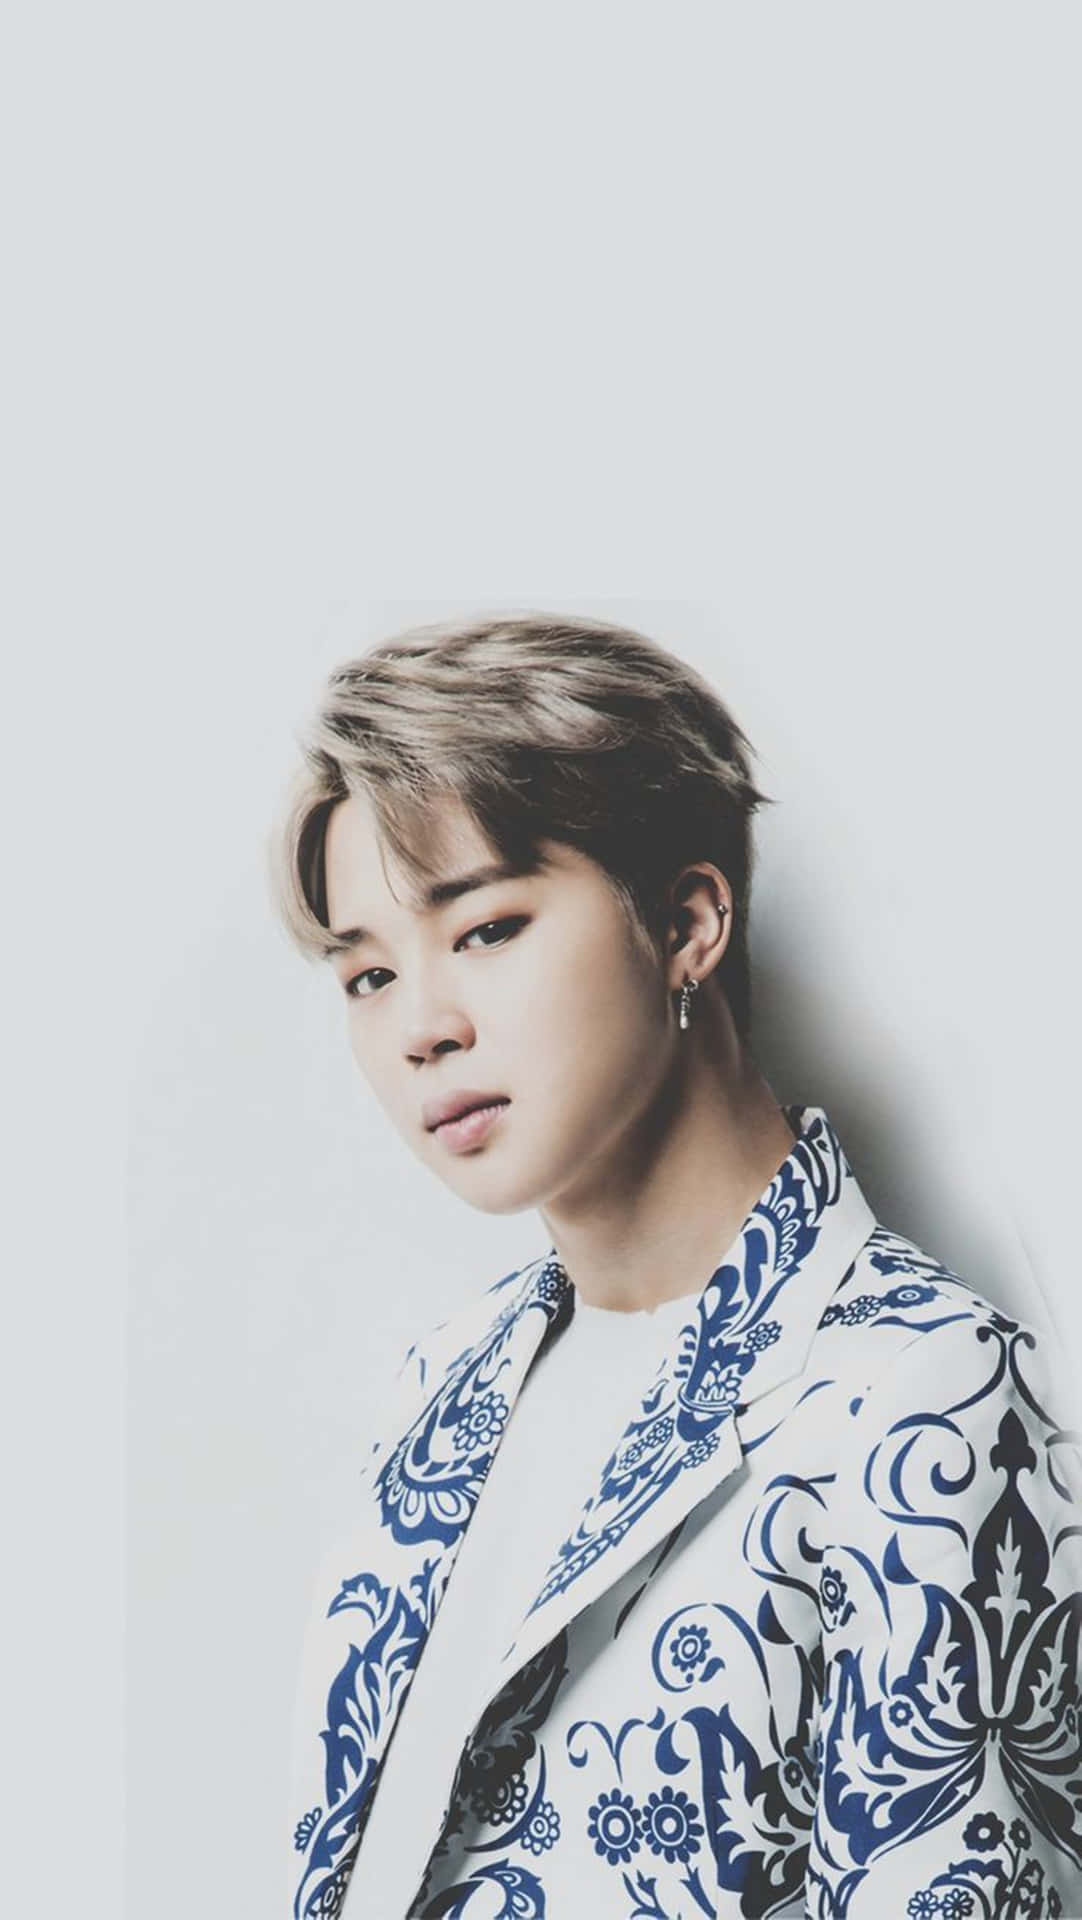 Jimin From Bts In A Stunning Hd Pose Background